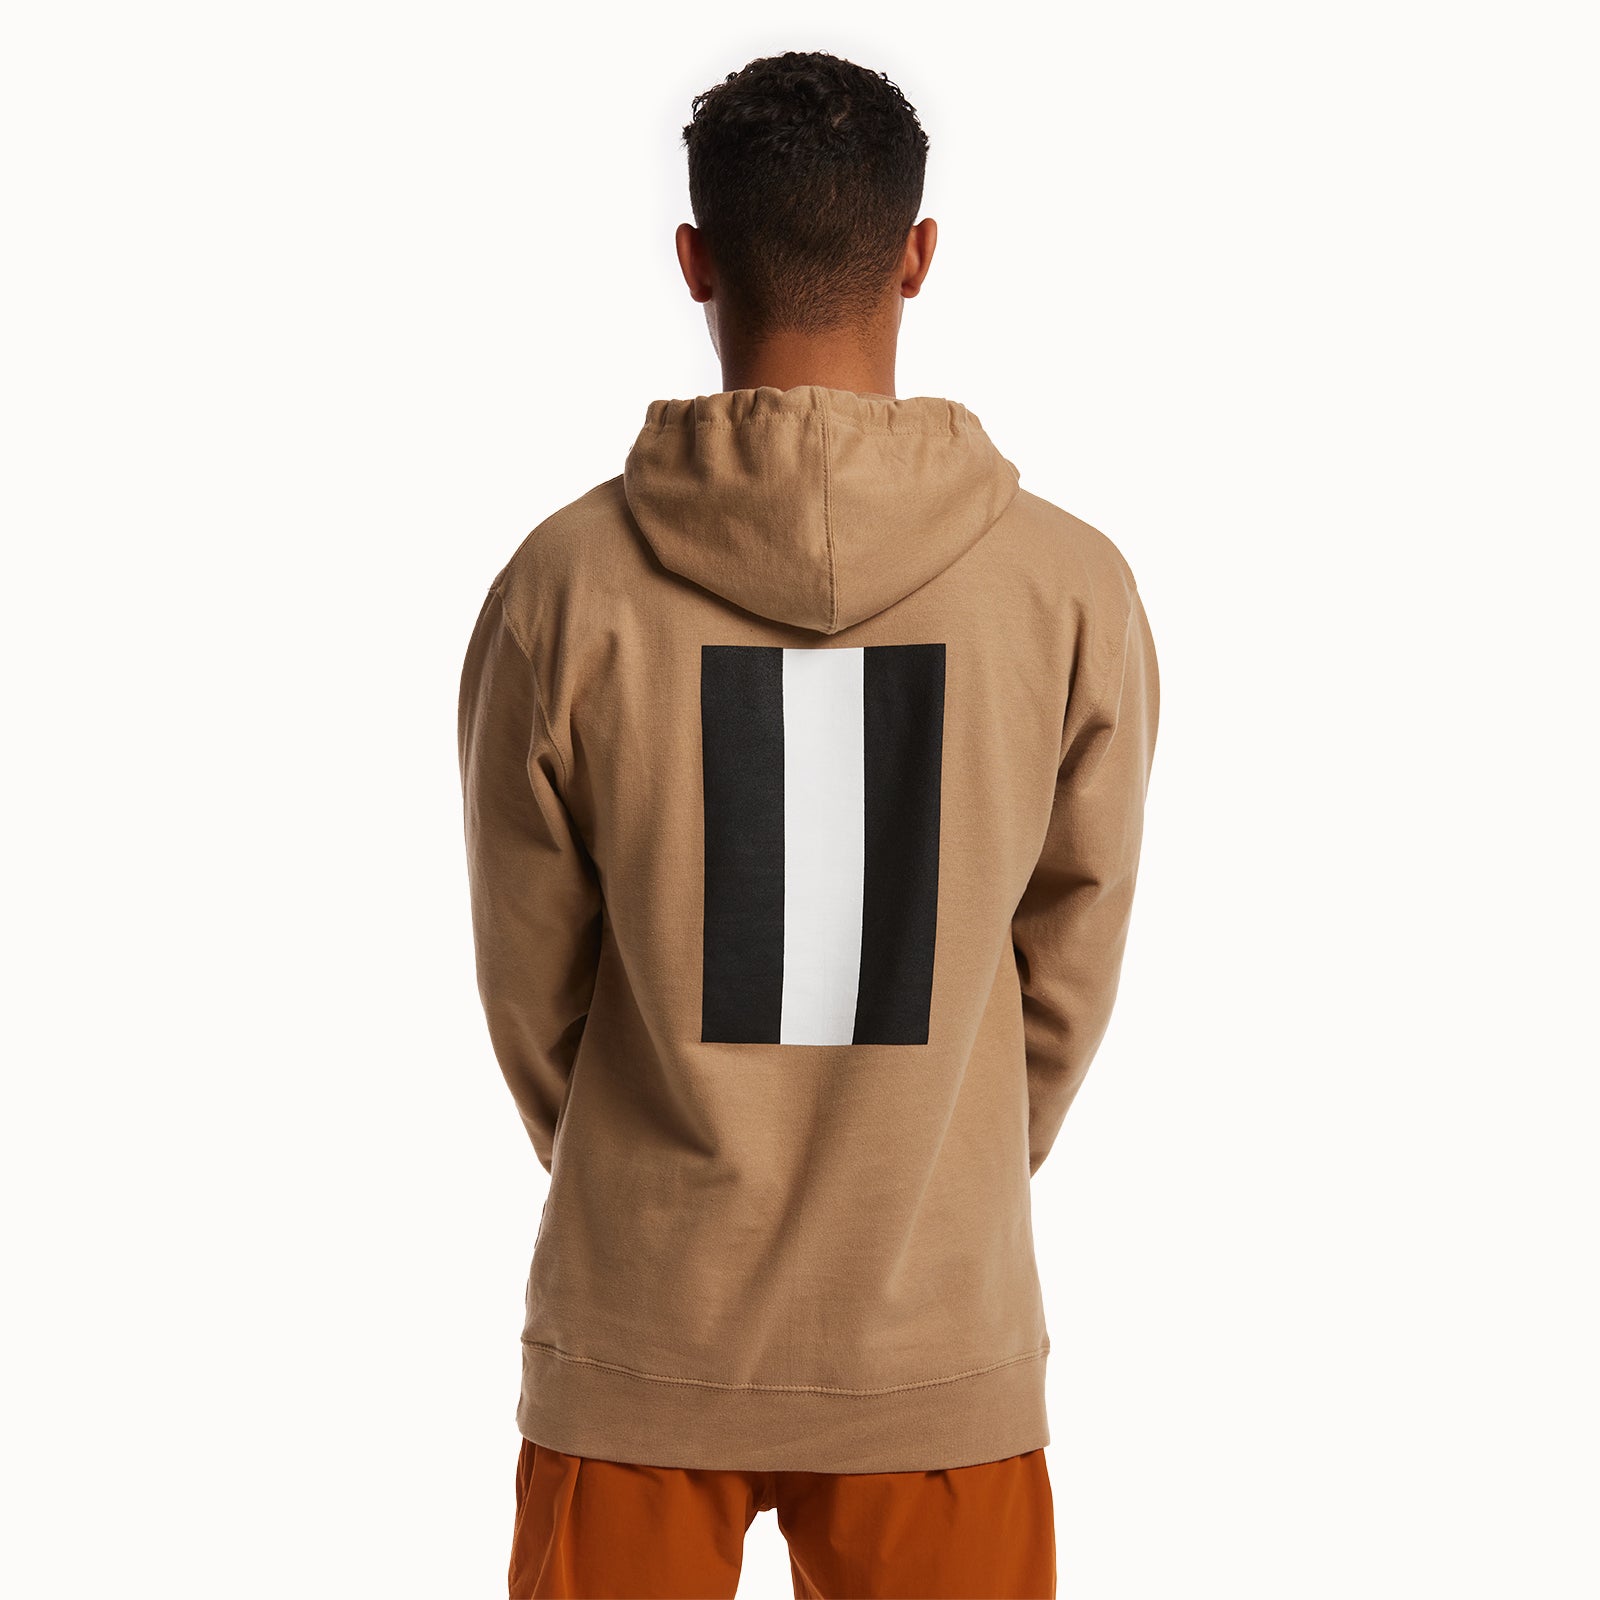 Performance Collection Hoodie